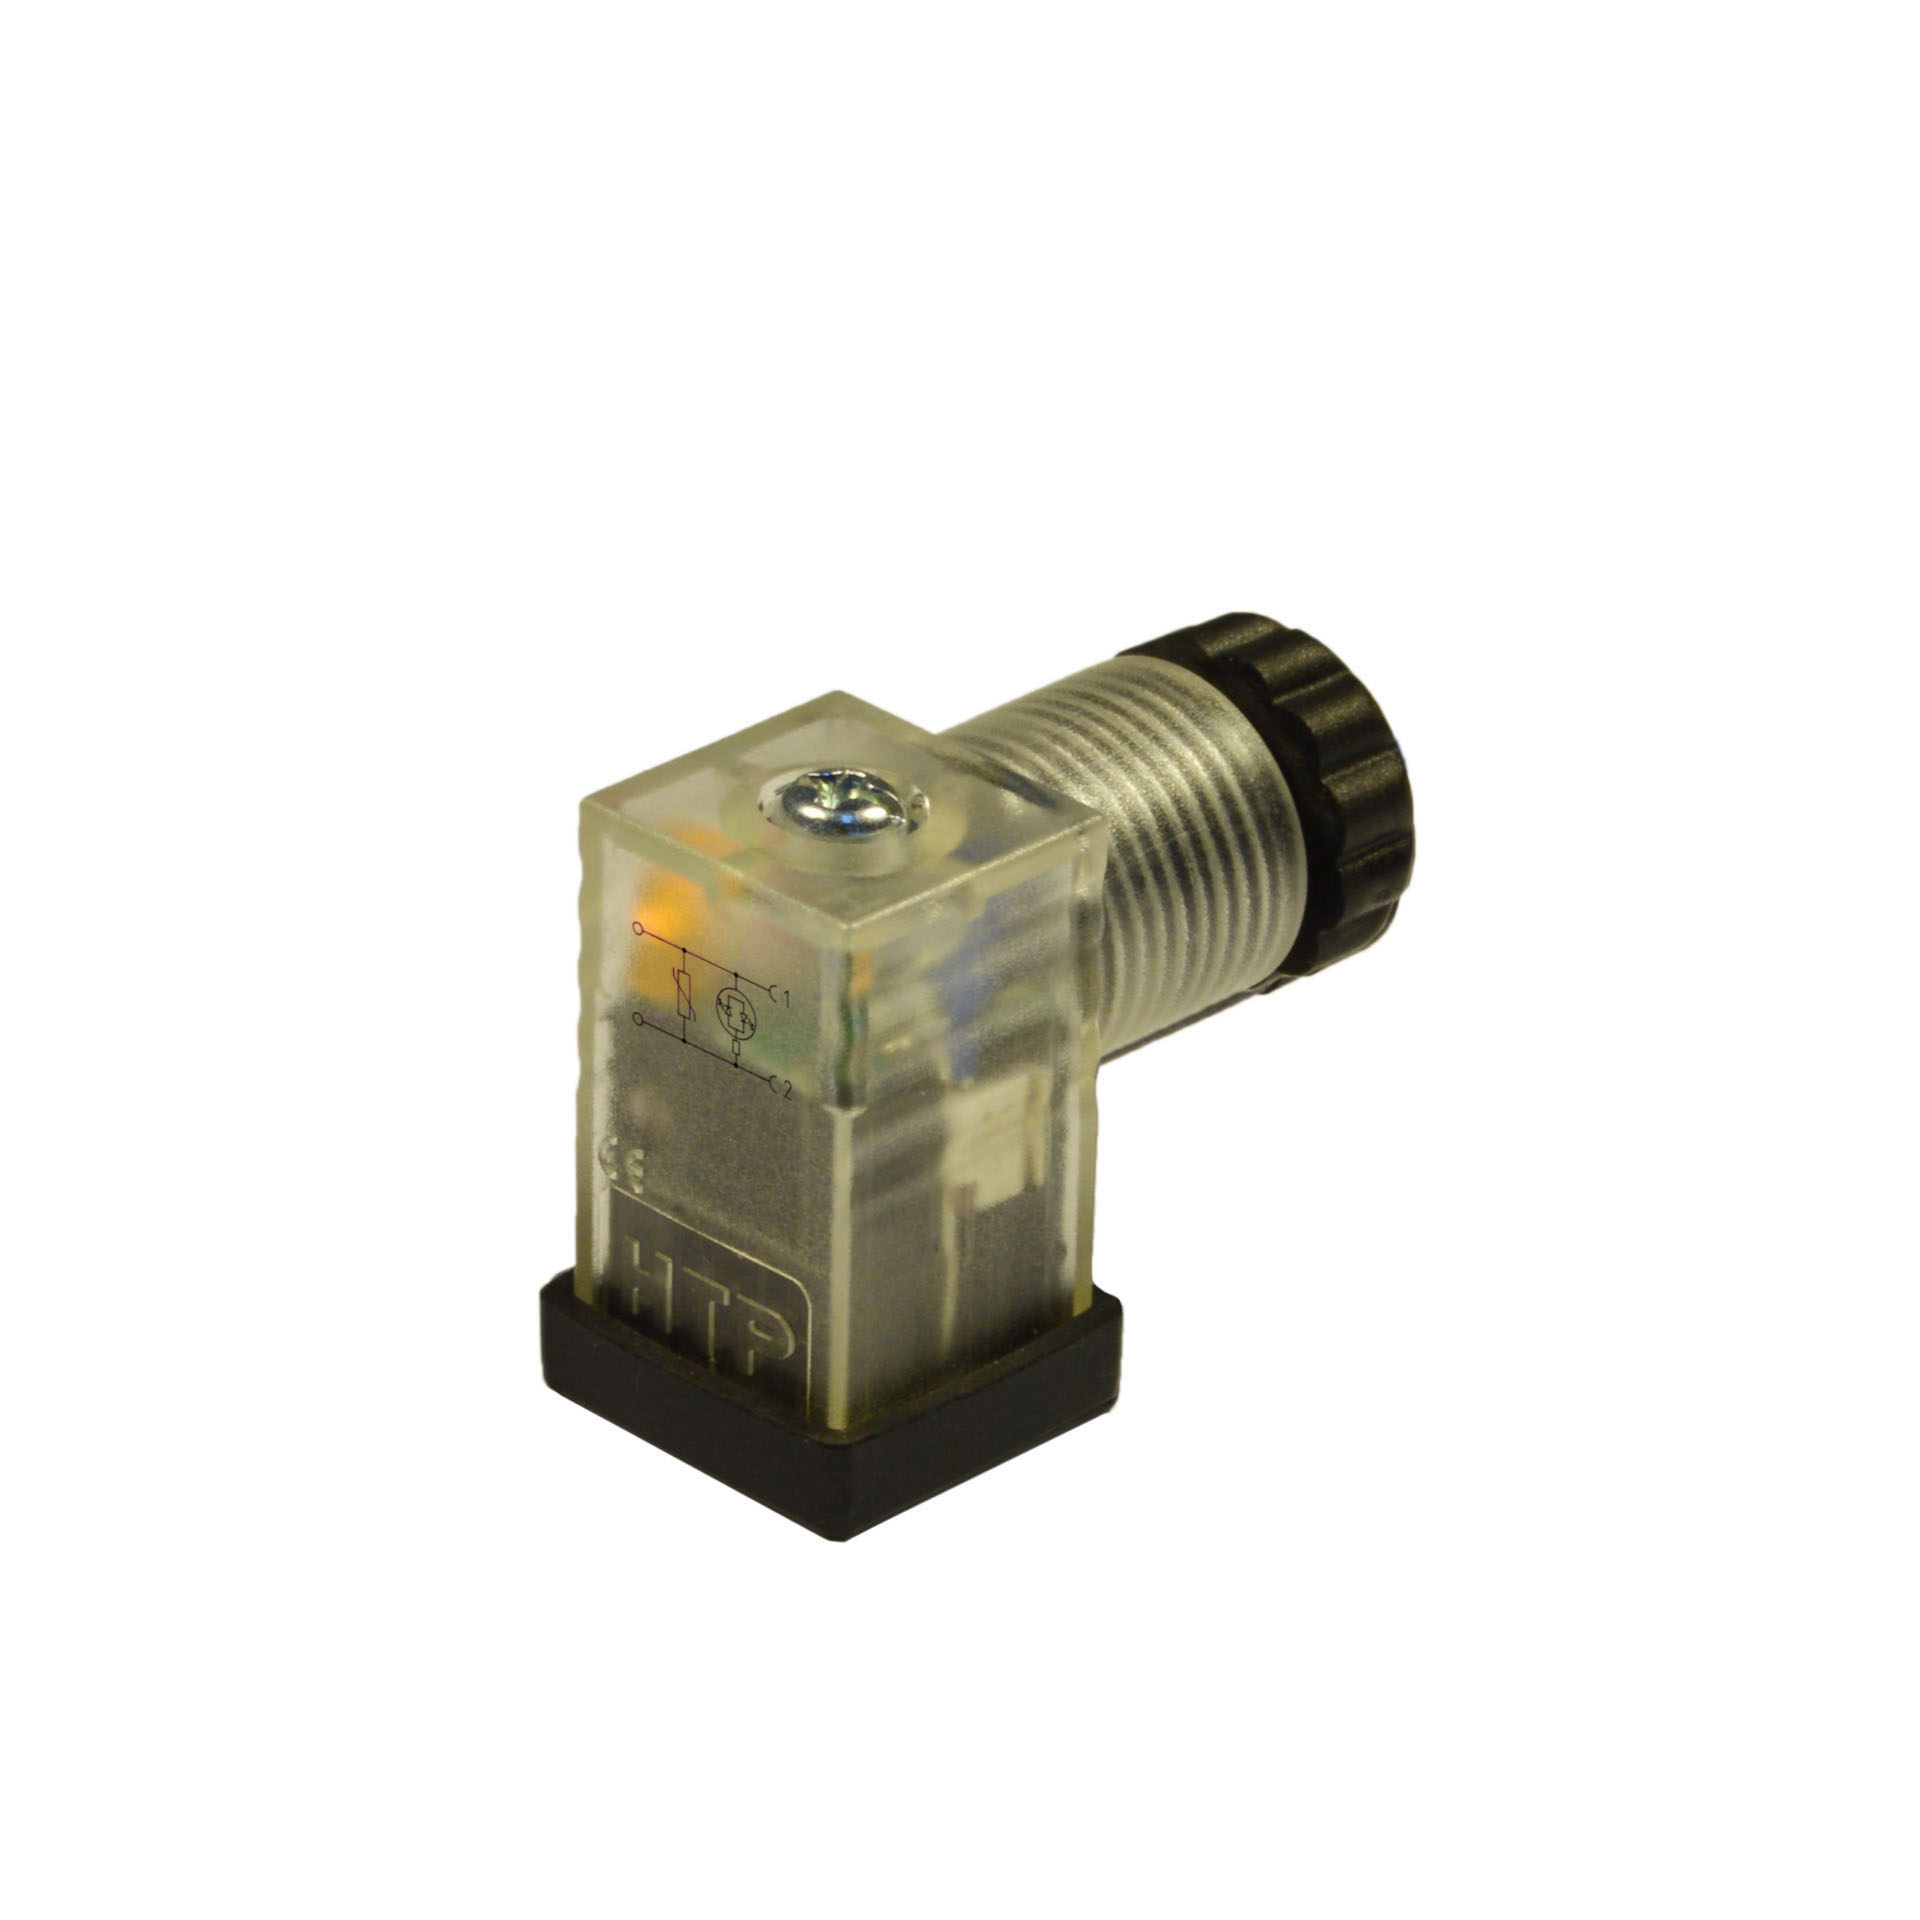 Industriale/C a cablare,2p+T(h.6),LED giallo+vdr,24VAC/DC,PG7